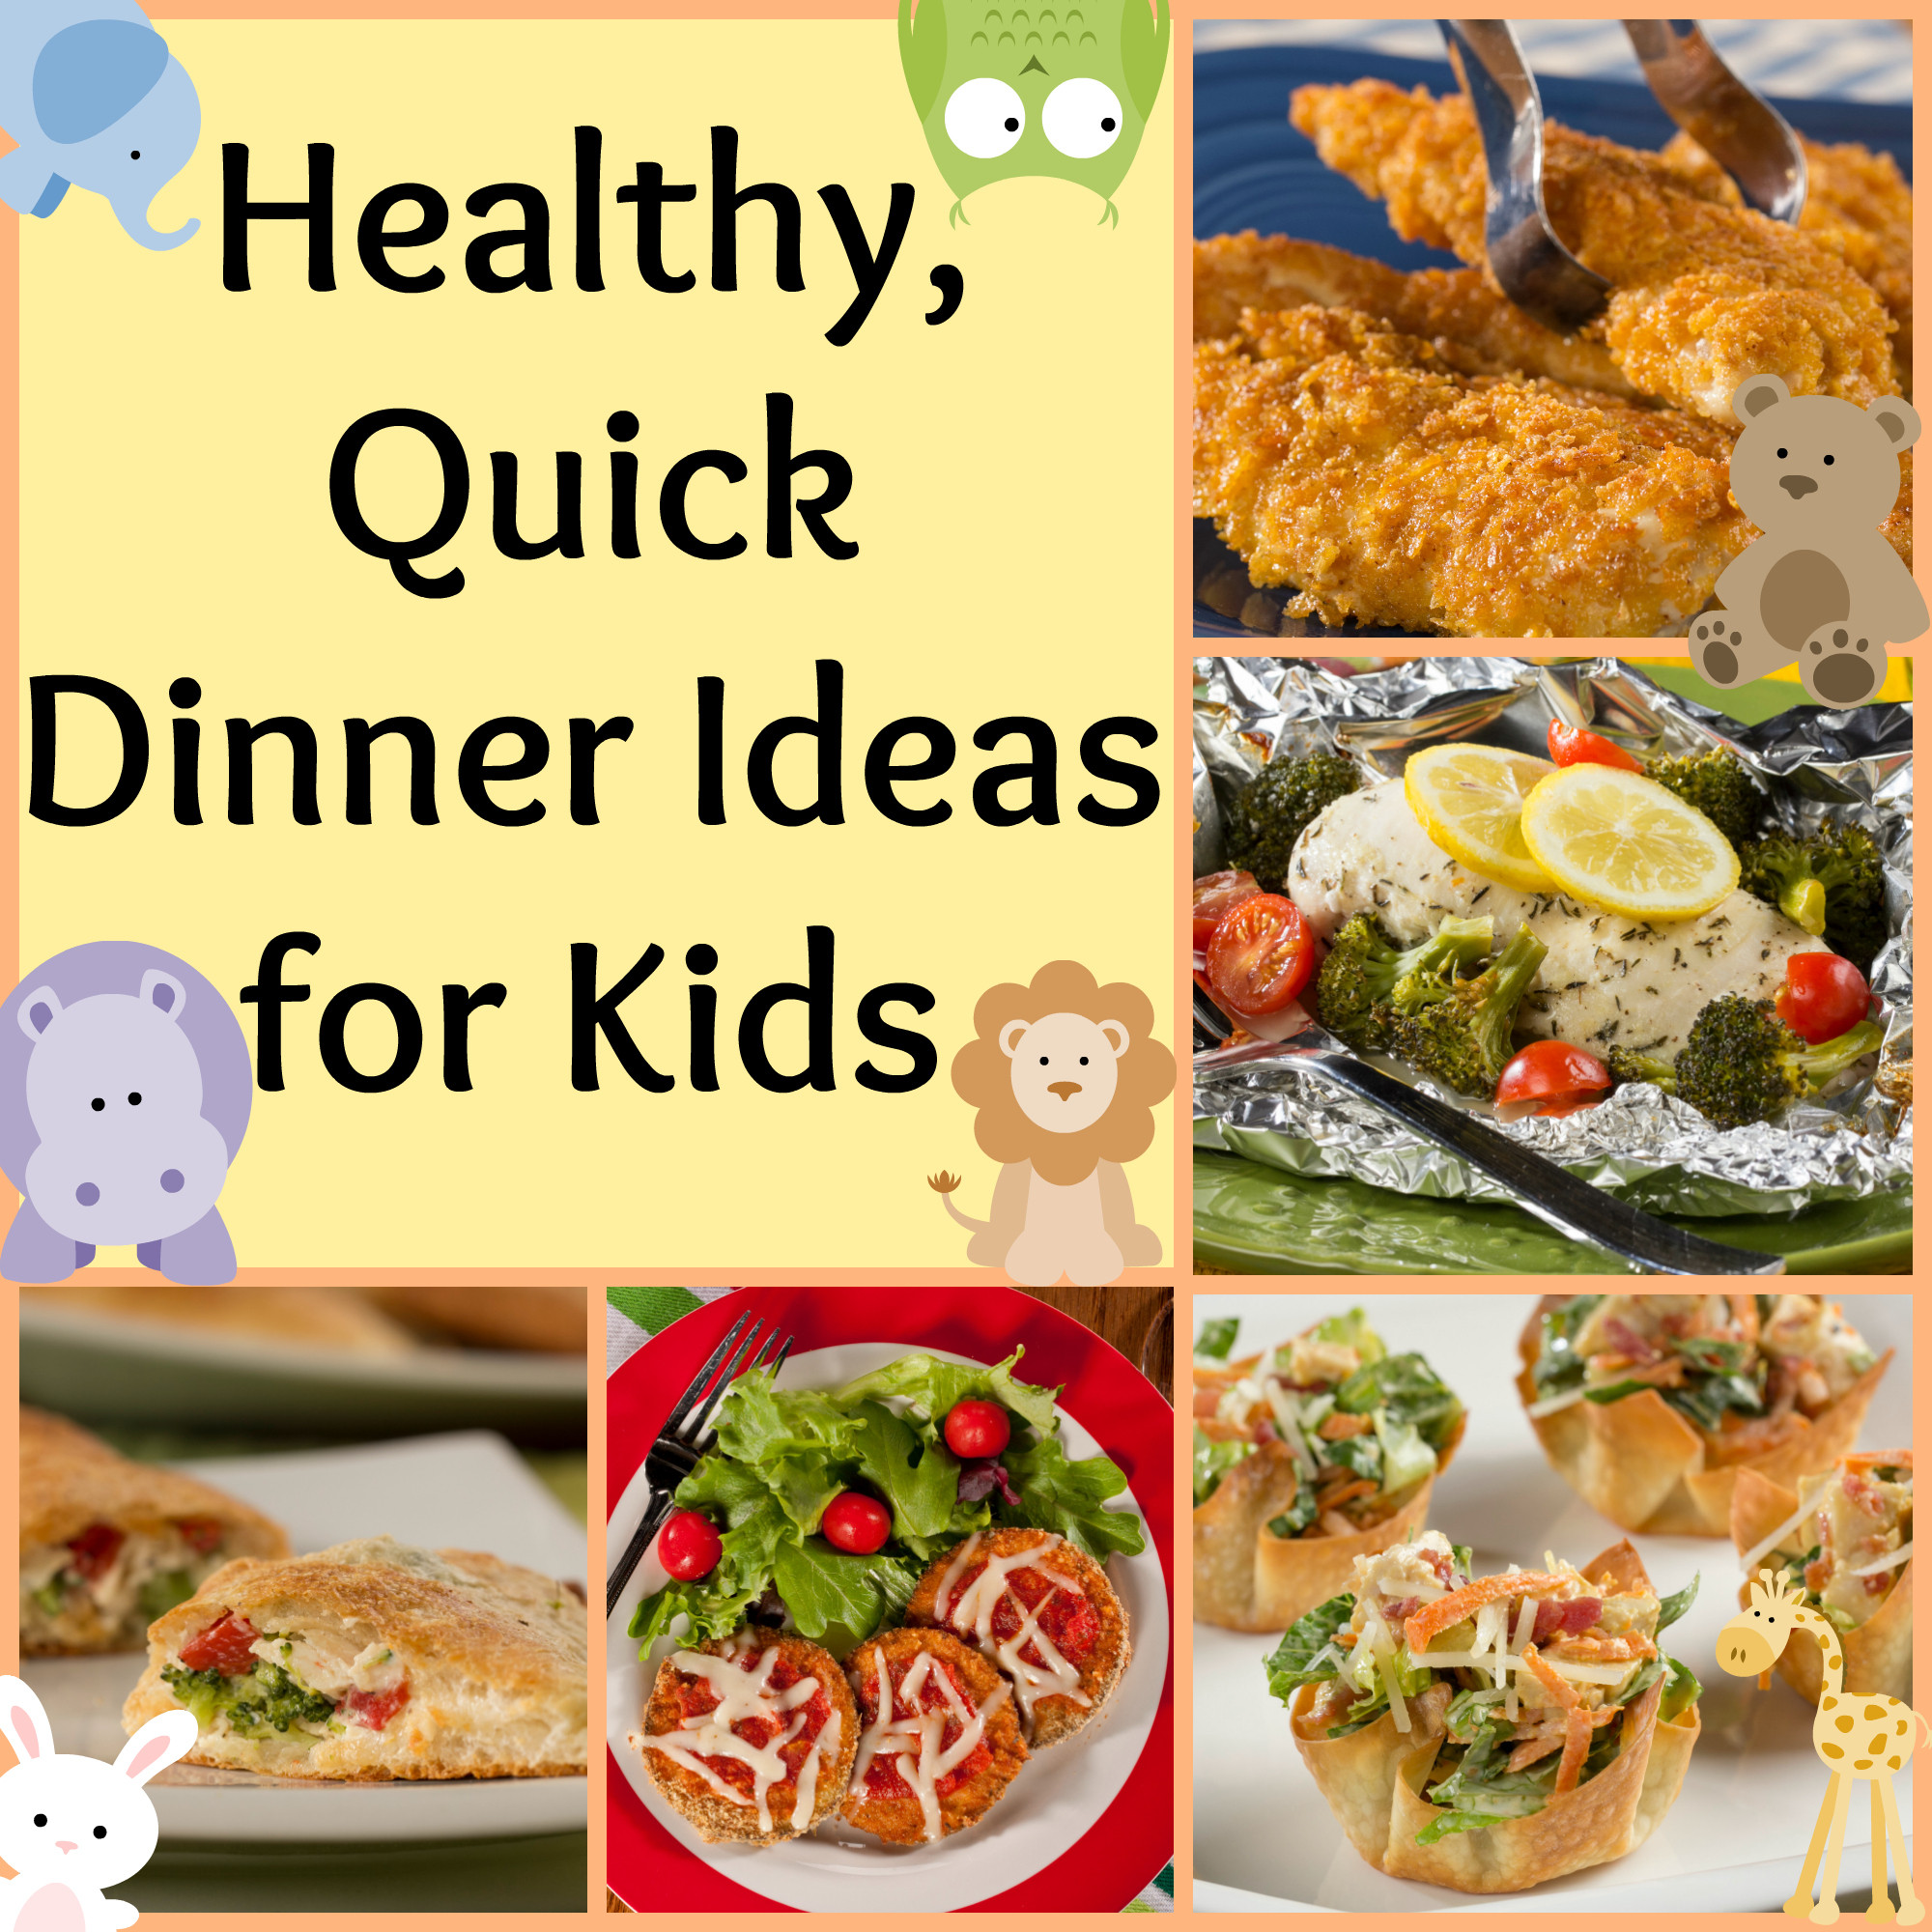 Easy Healthy Dinner Recipes For Kids
 Healthy Quick Dinner Ideas for Kids Mr Food s Blog